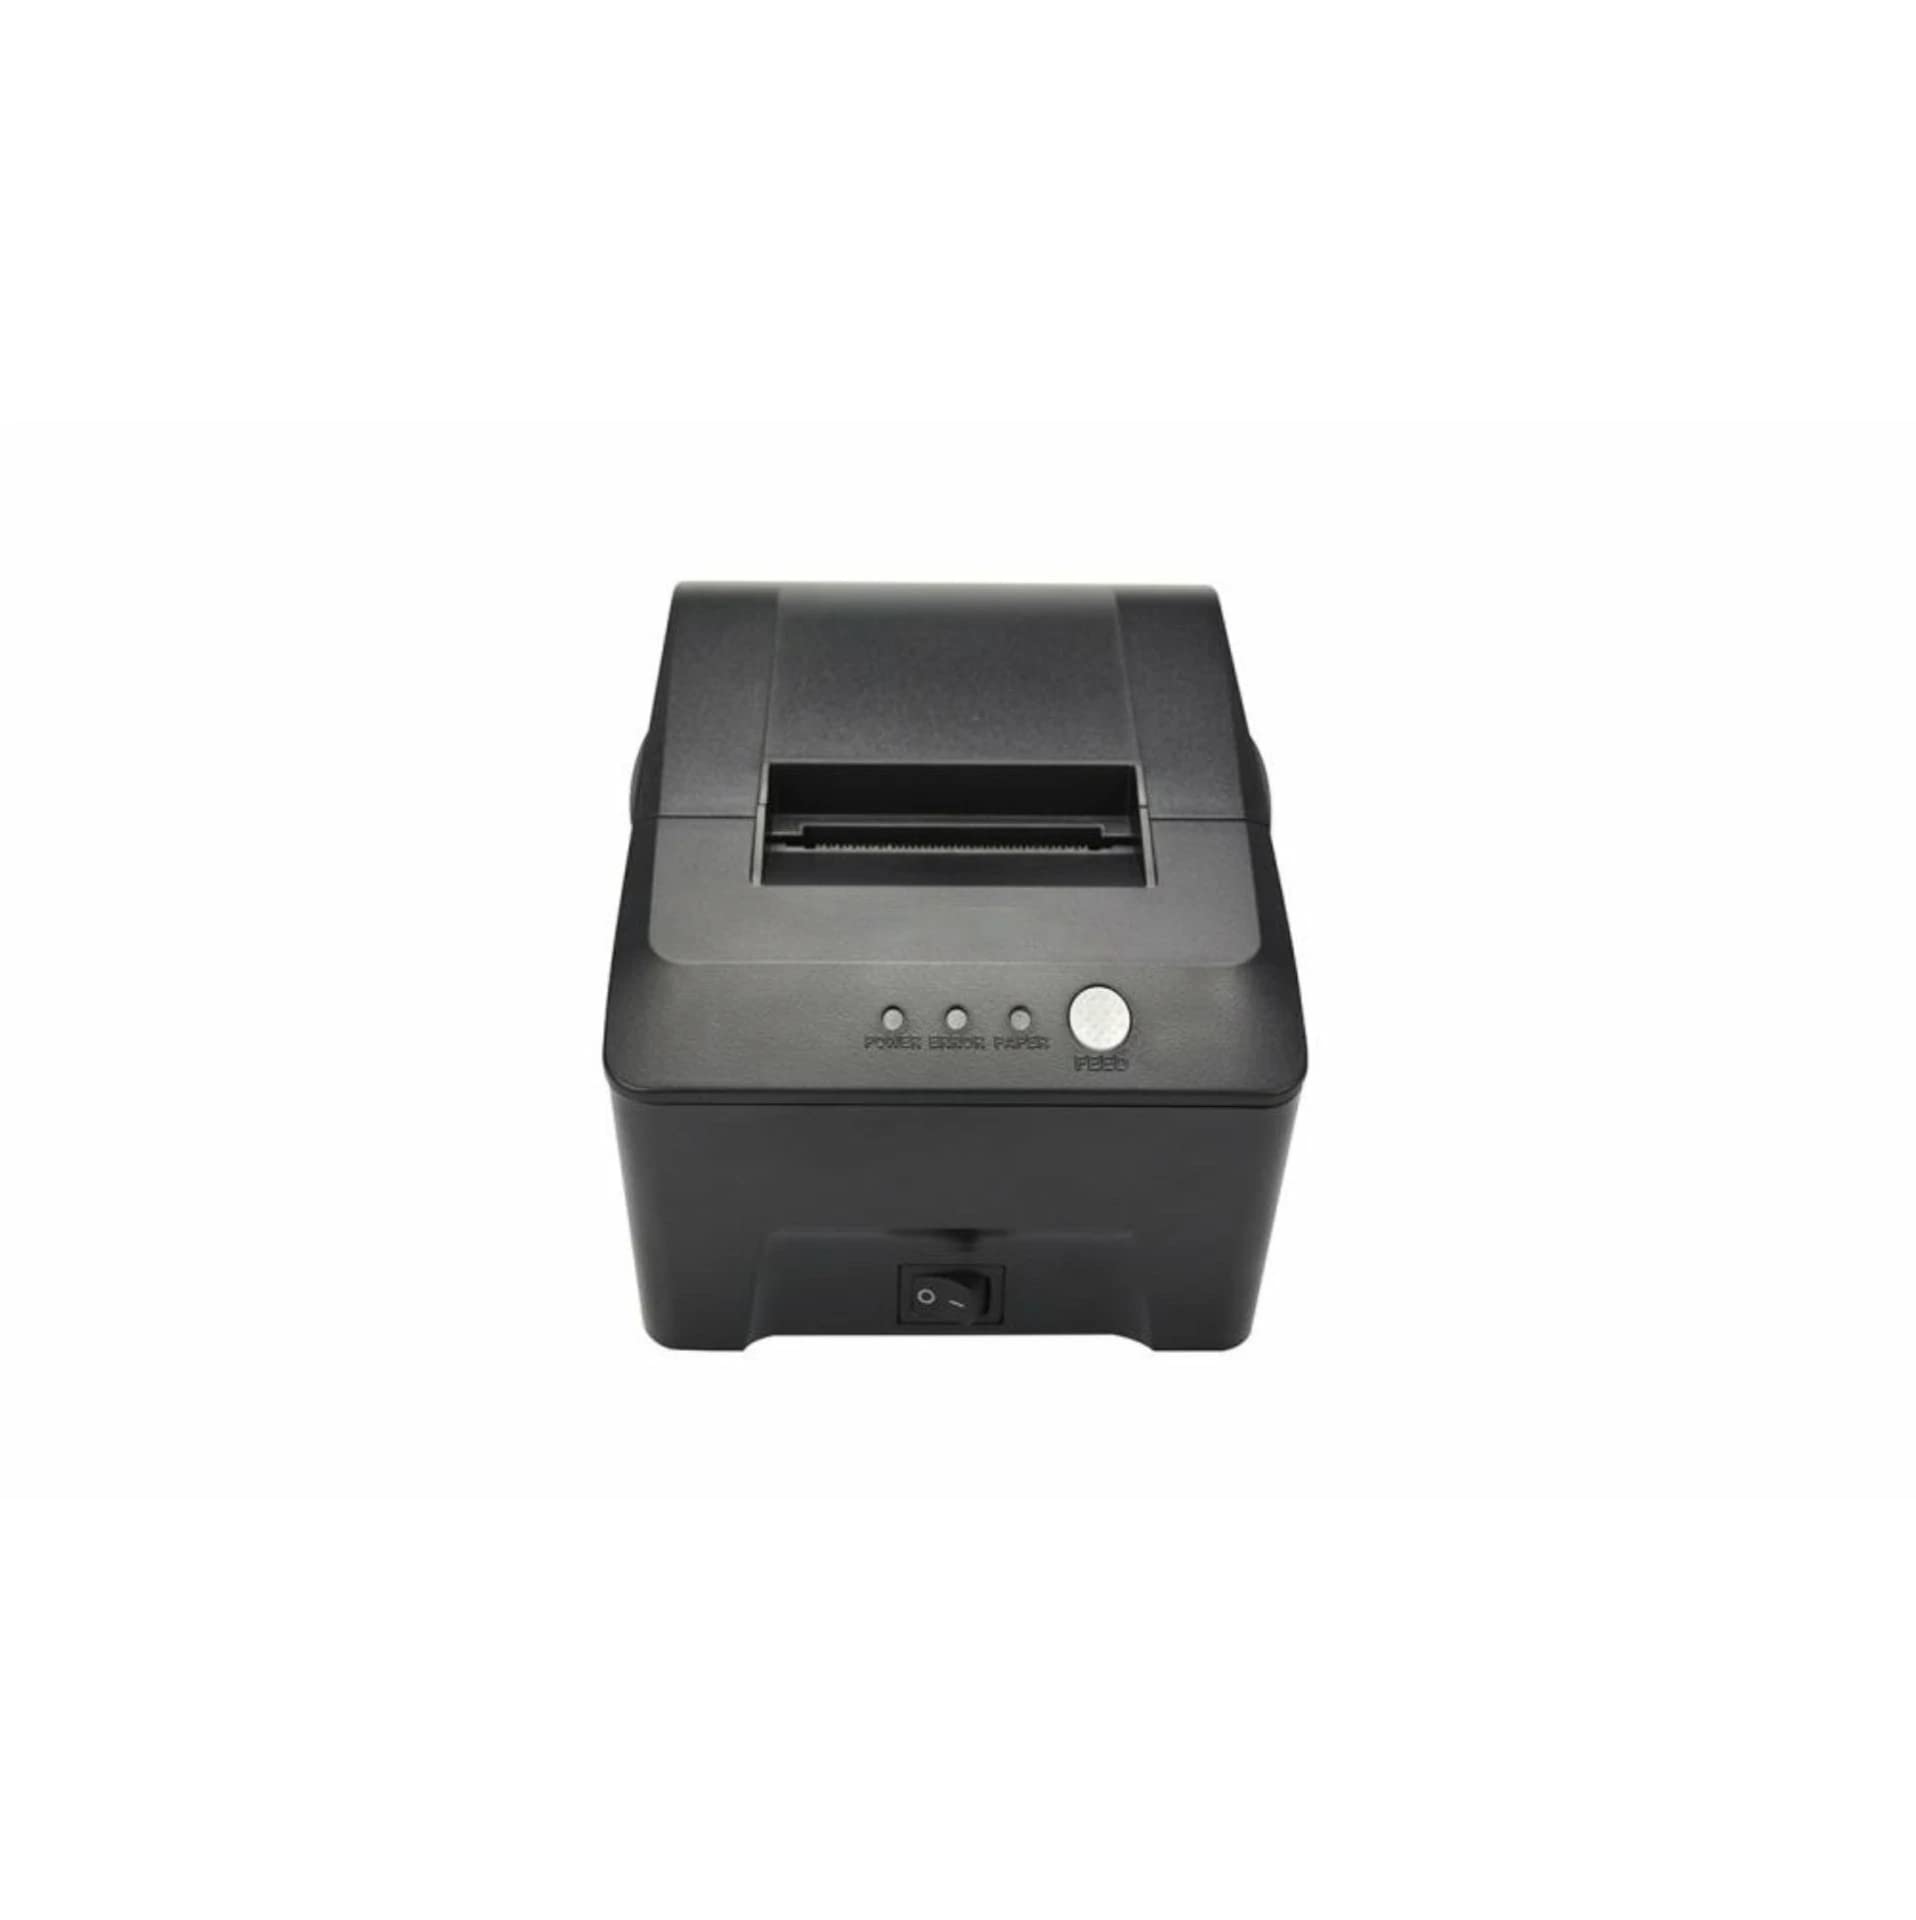 Mua SellEton SL-25 Thermal Printer Desktop for Shipping Labels, Barcodes,  Receipts, Tags USB Interface Serial Port, with Power Supply Fast  Processing trên Amazon Mỹ chính hãng 2023 Giaonhan247